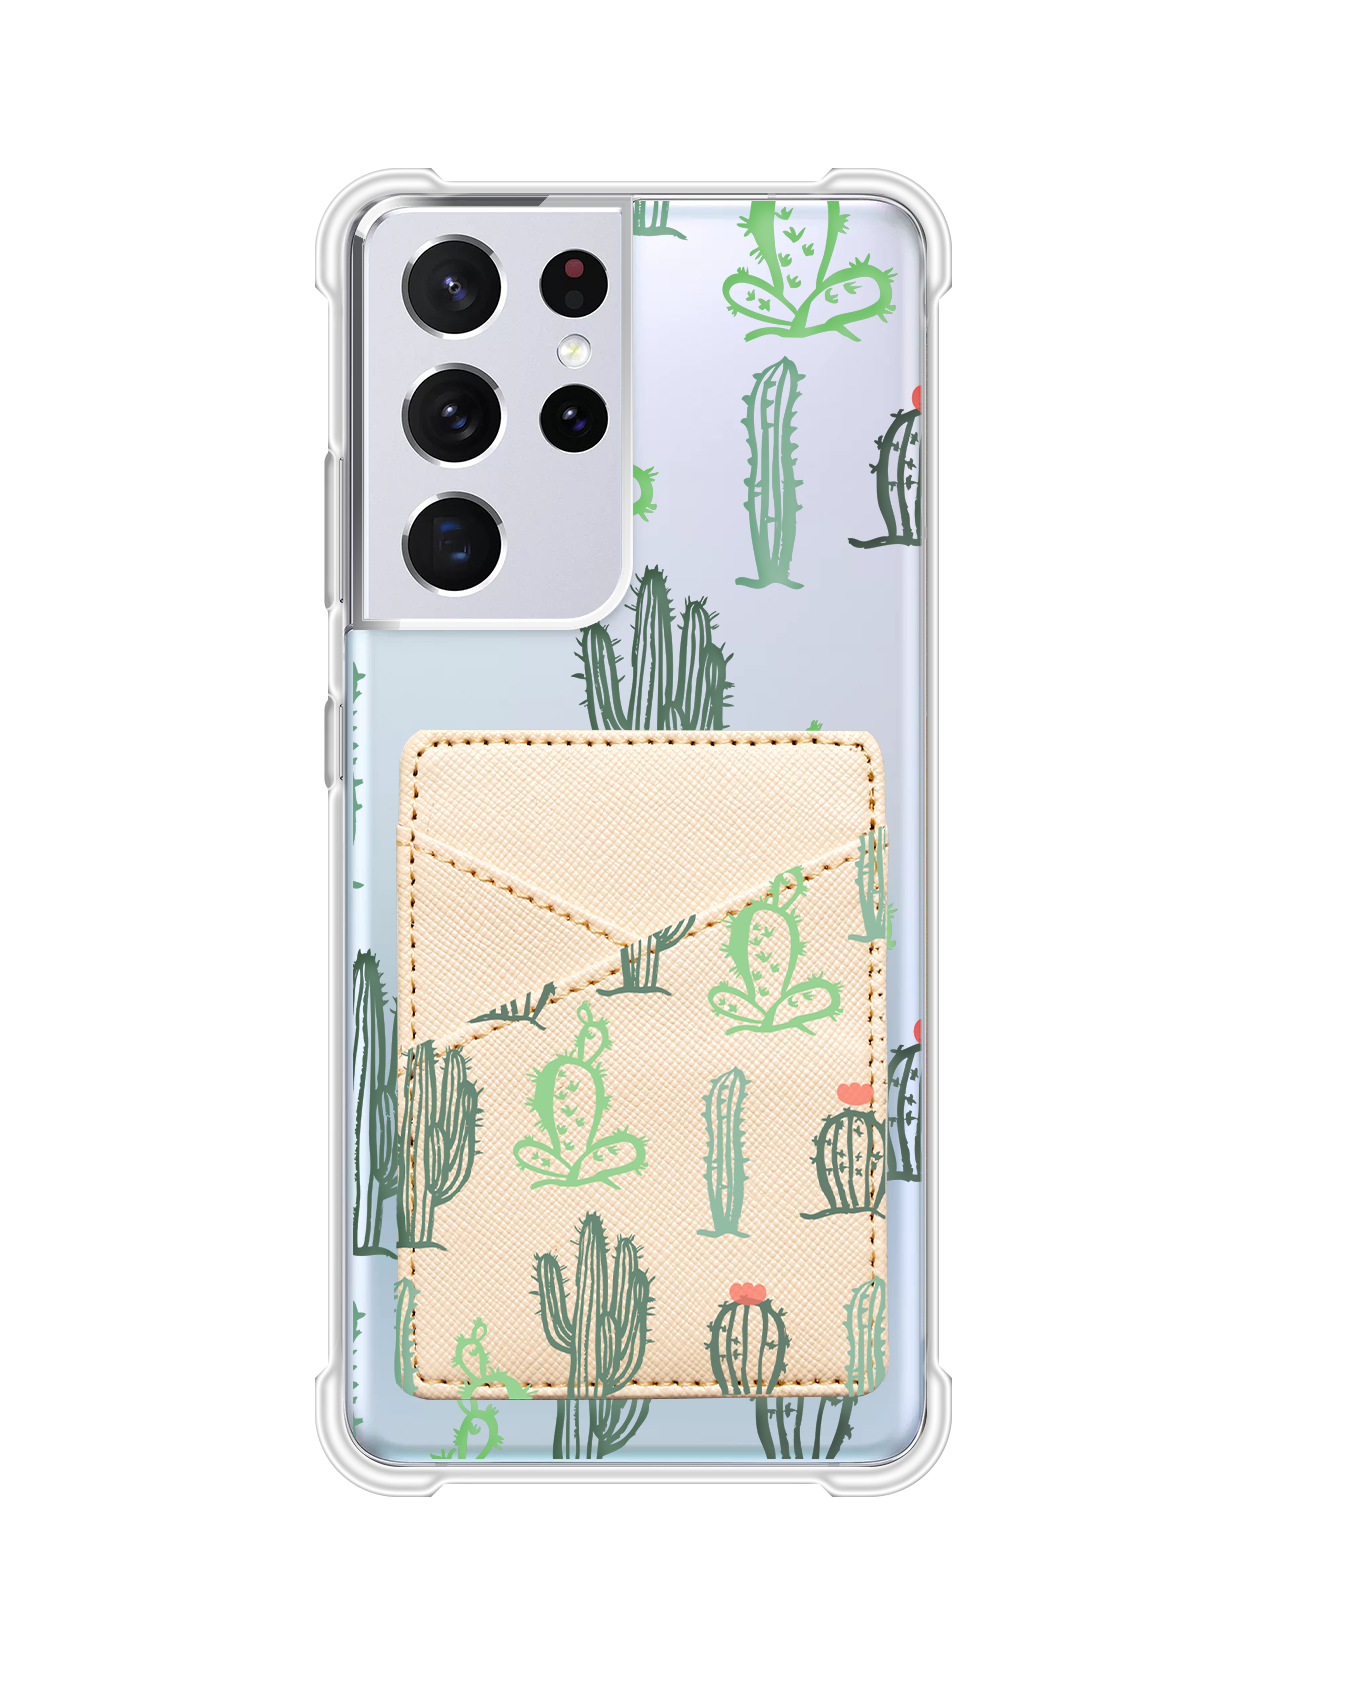 Android Phone Wallet Case - Cactus